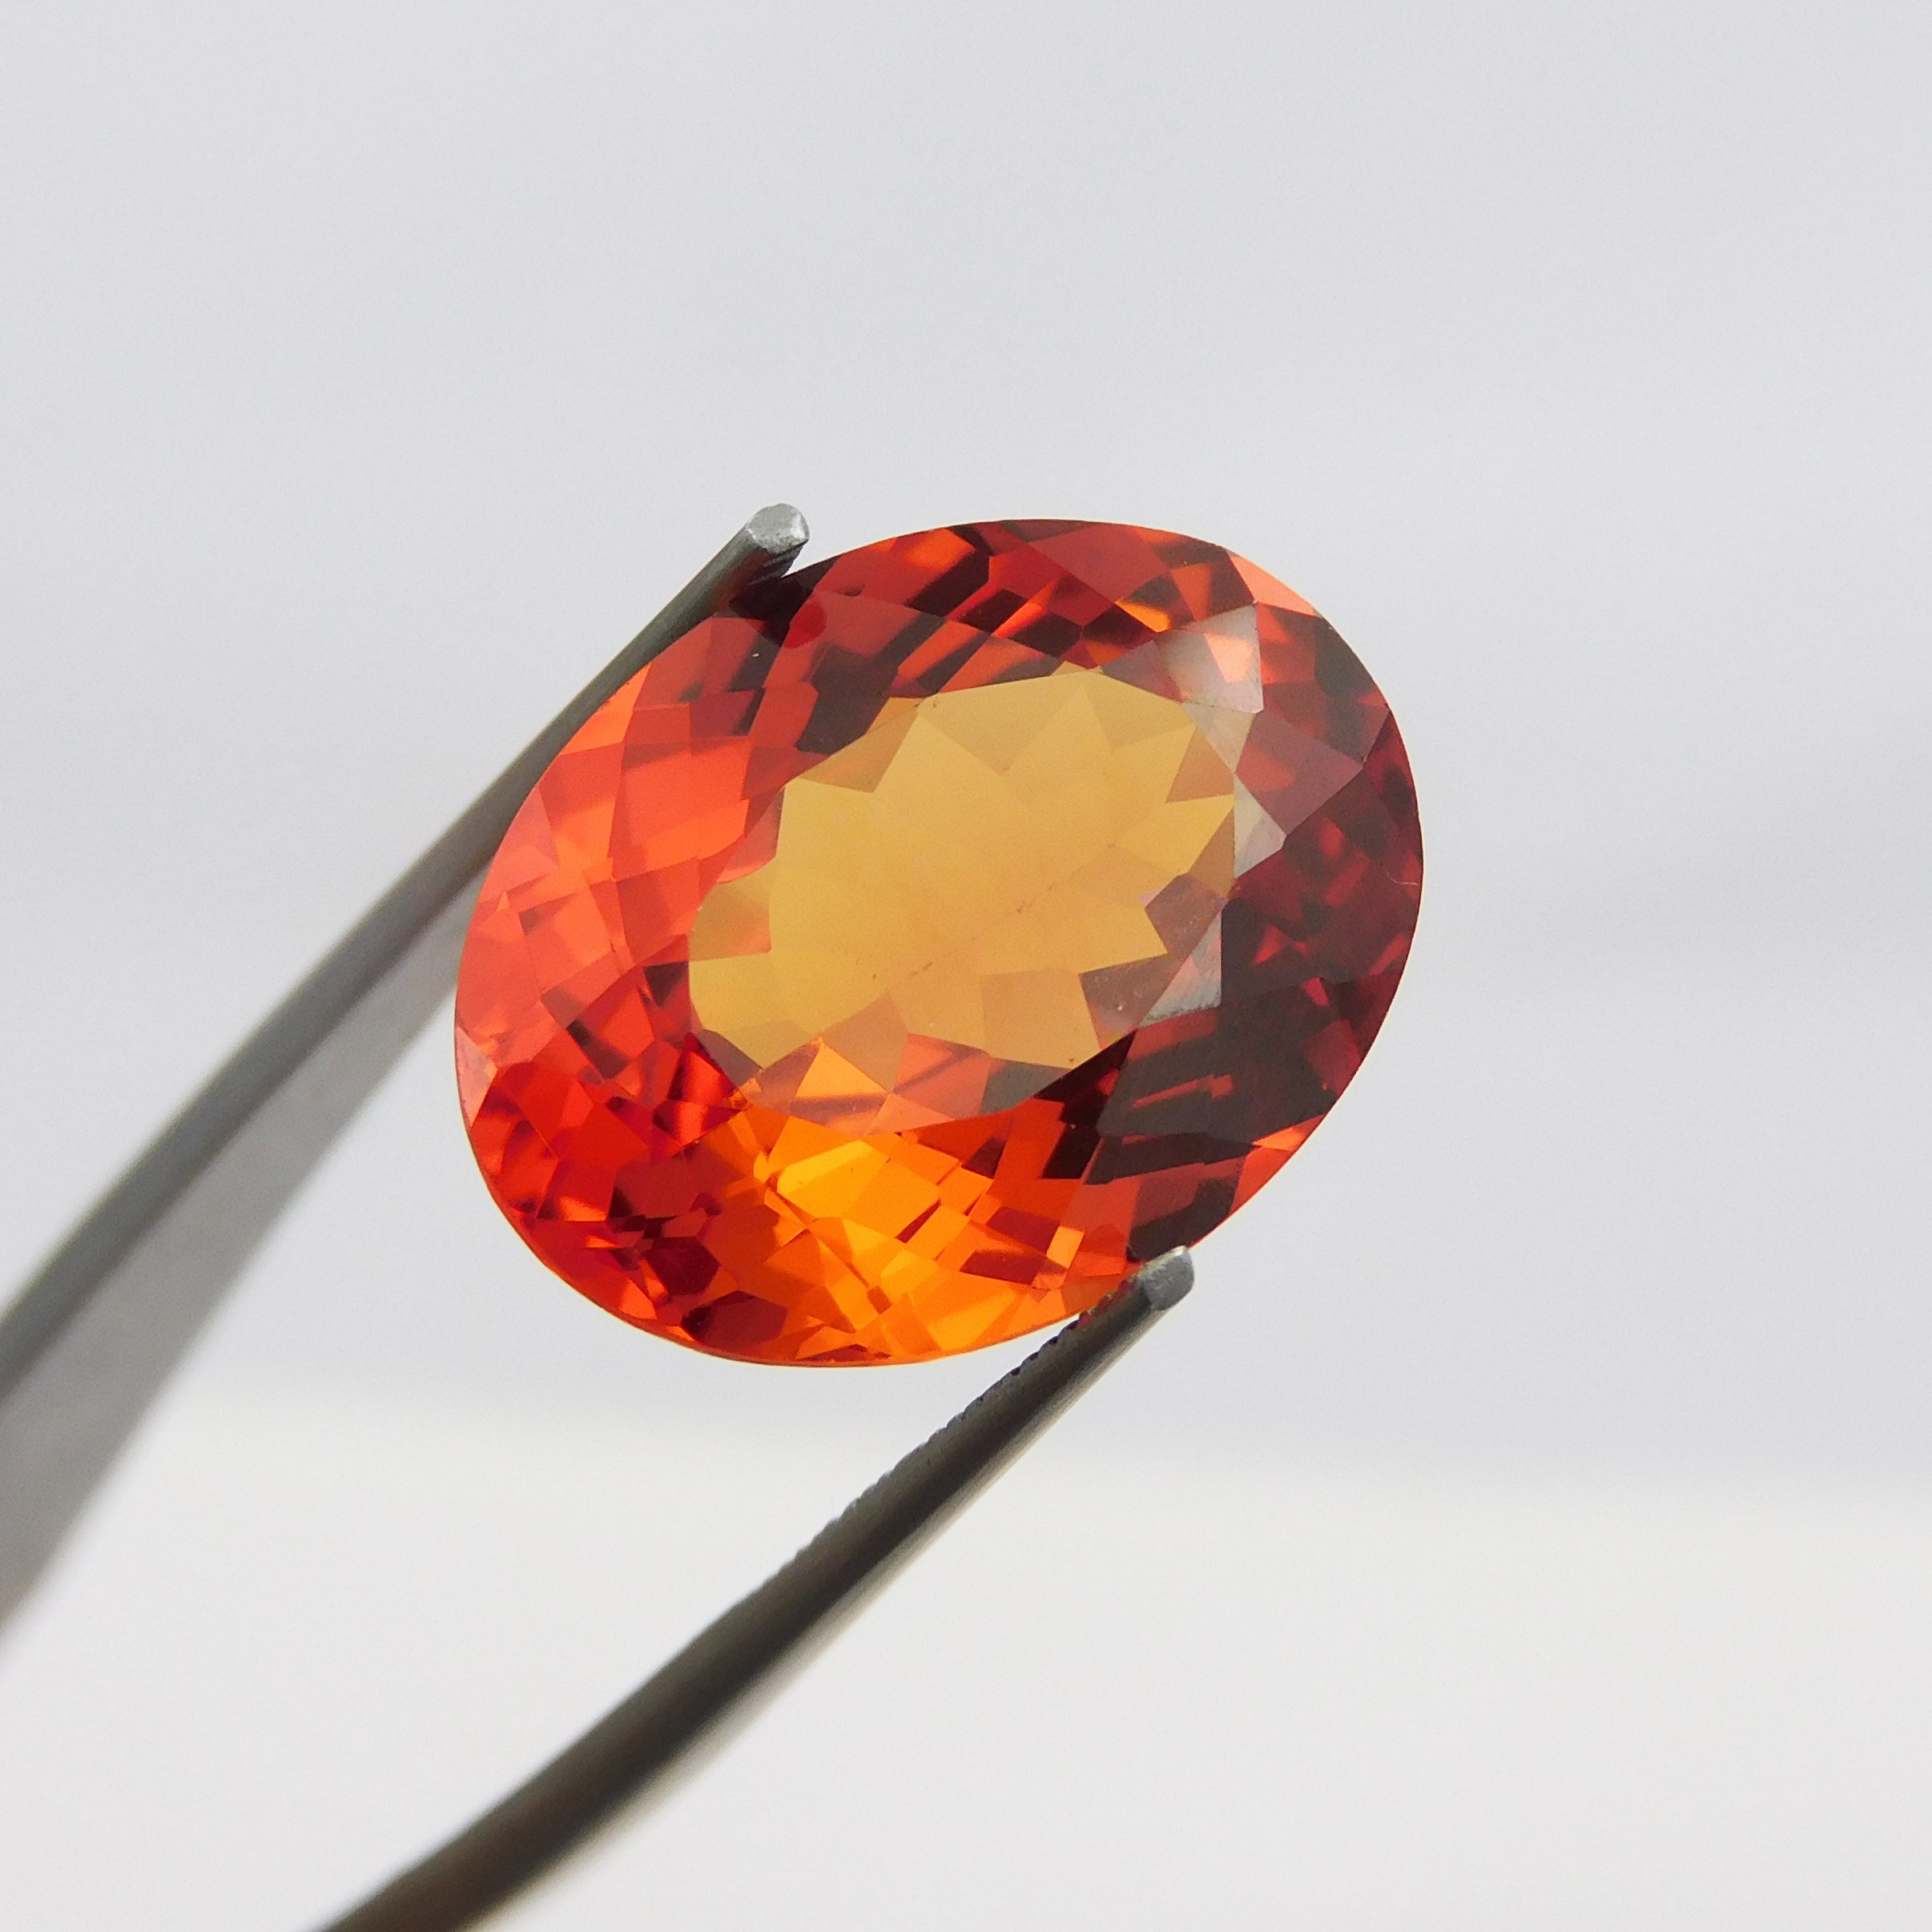 Orange Color Sapphire 9.65 Carat Oval Cut Certified Natural Sapphire Loose Gemstone | Free Shipping Free Gift | GRAB FOR IT